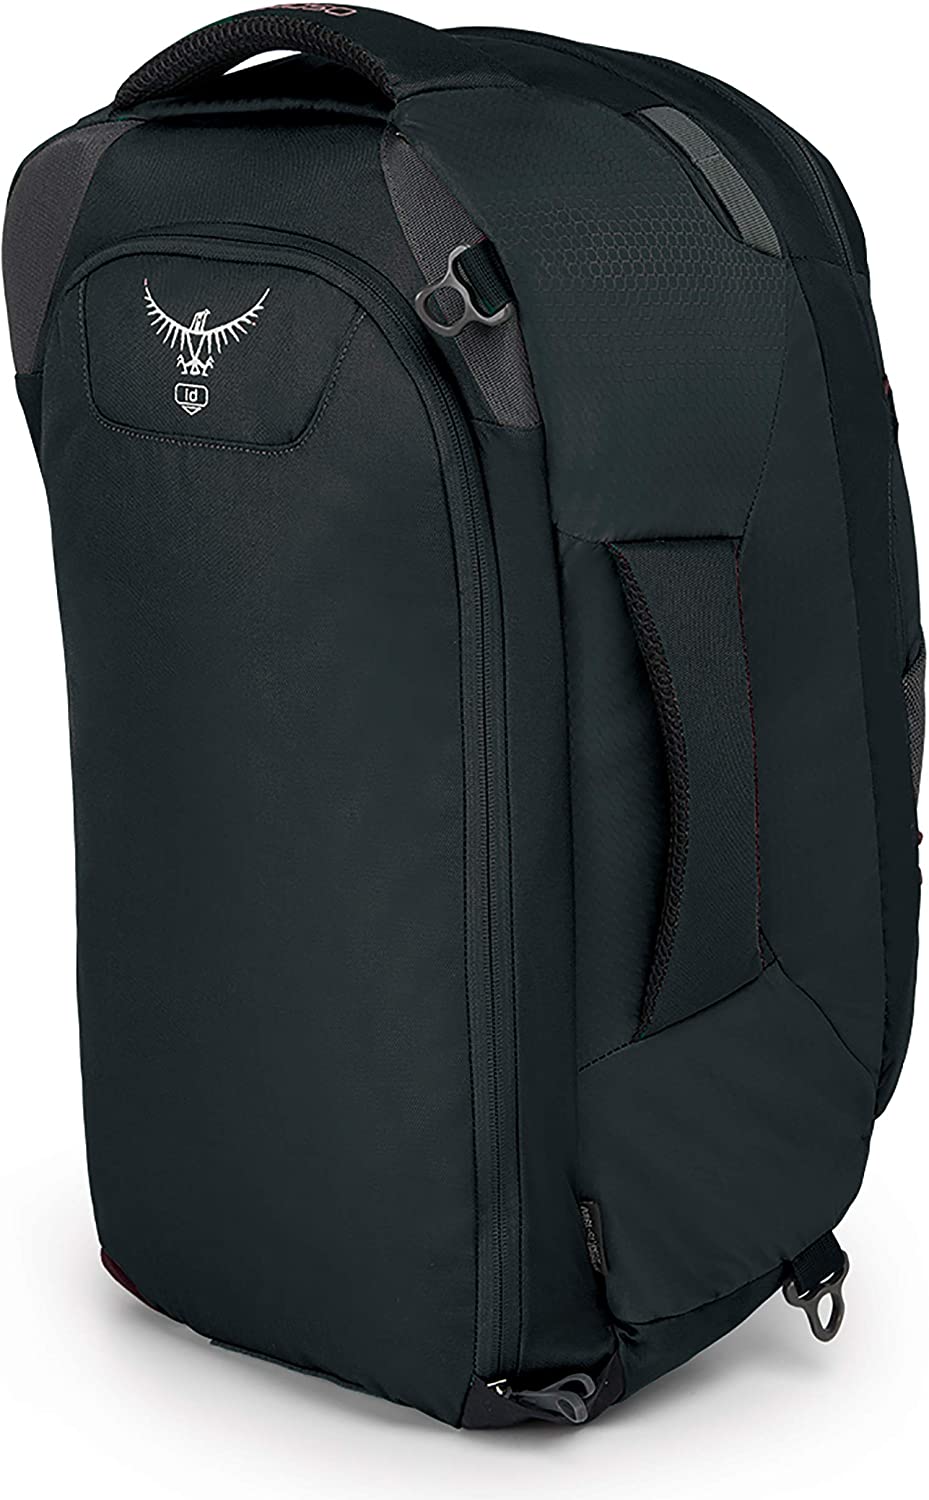 Osprey Farpoint 40 Travel Pack - image 2 of 4